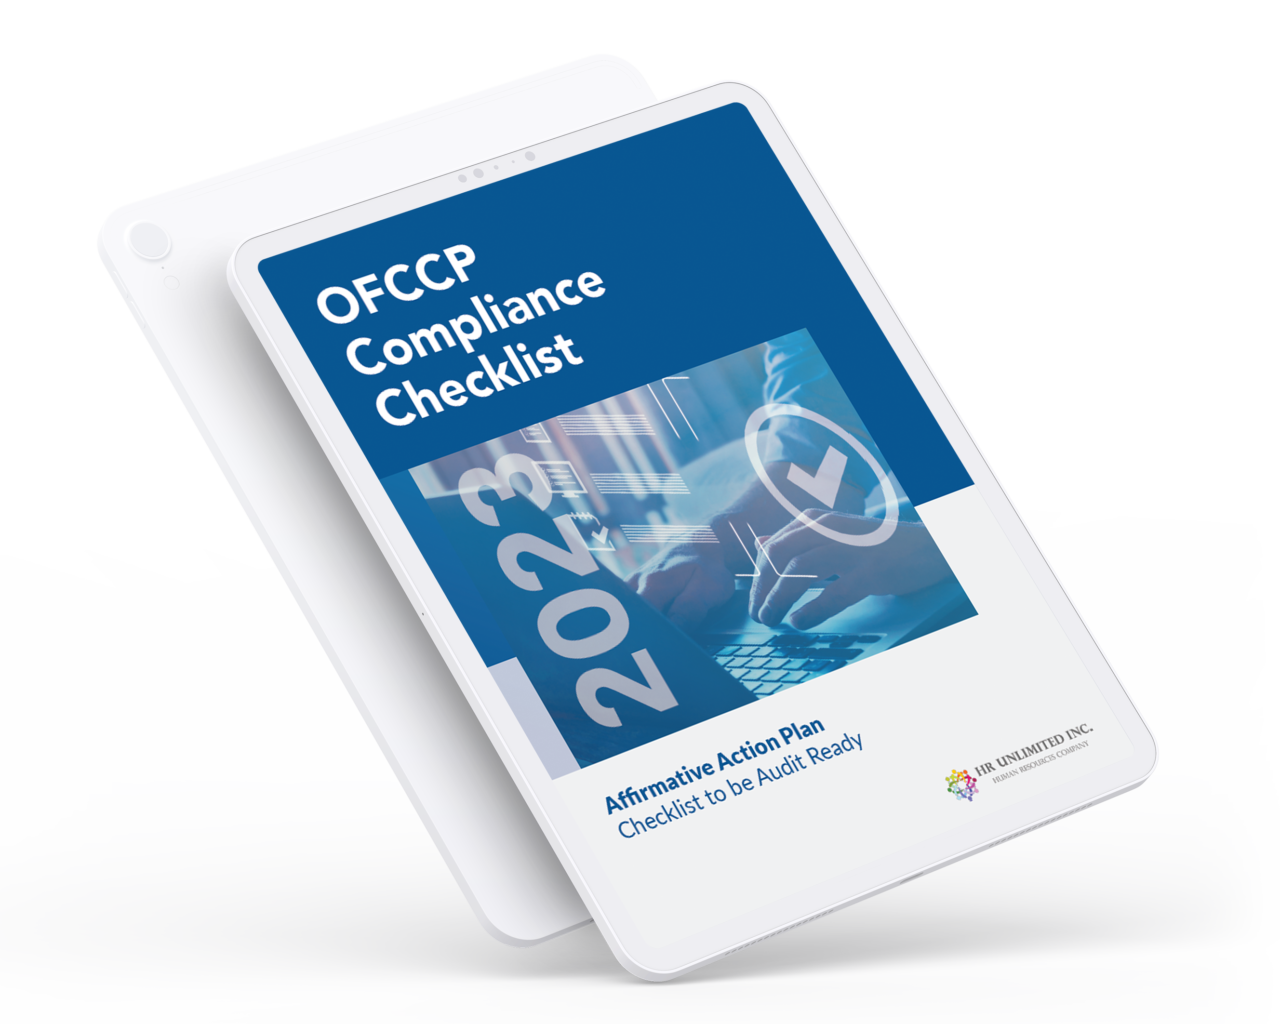 OFCCP Compliance Checklist Download to be Audit Ready